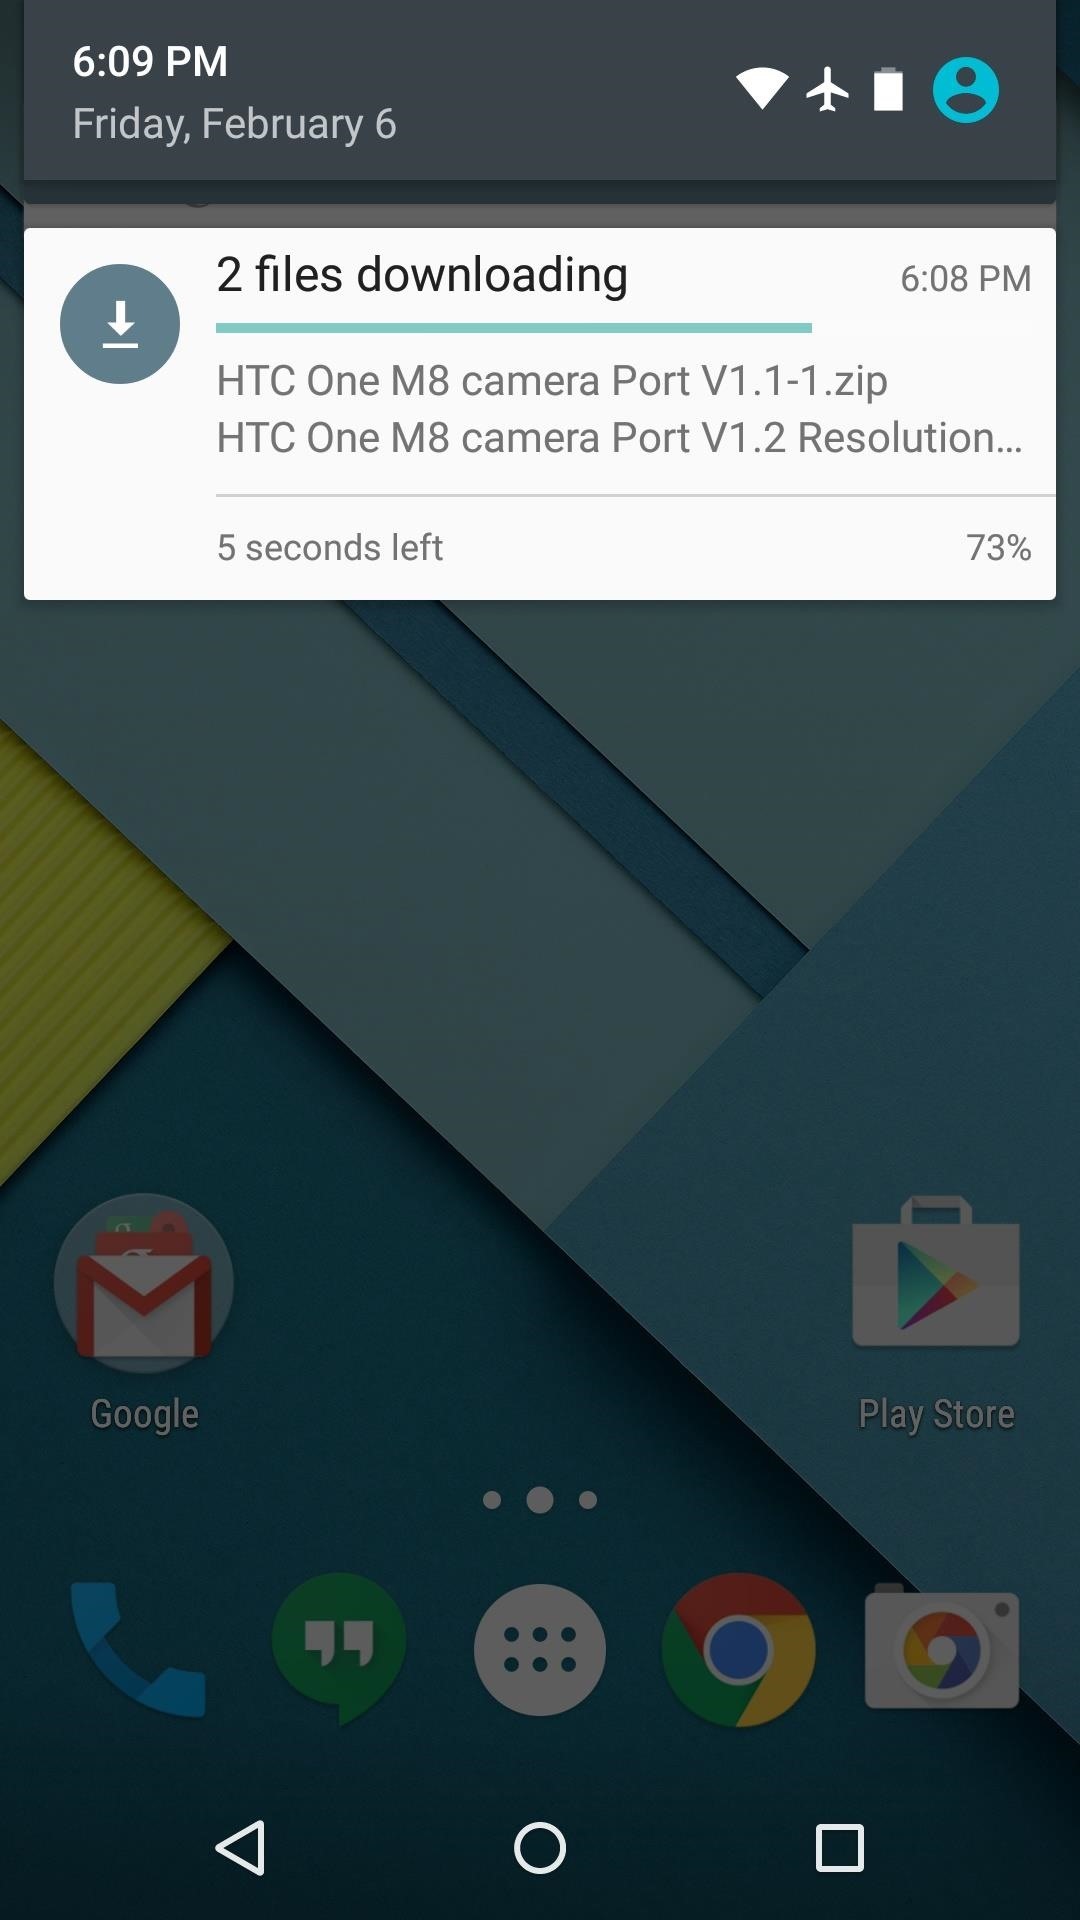 How to Get the HTC One M8's Camera App on Your Nexus 6